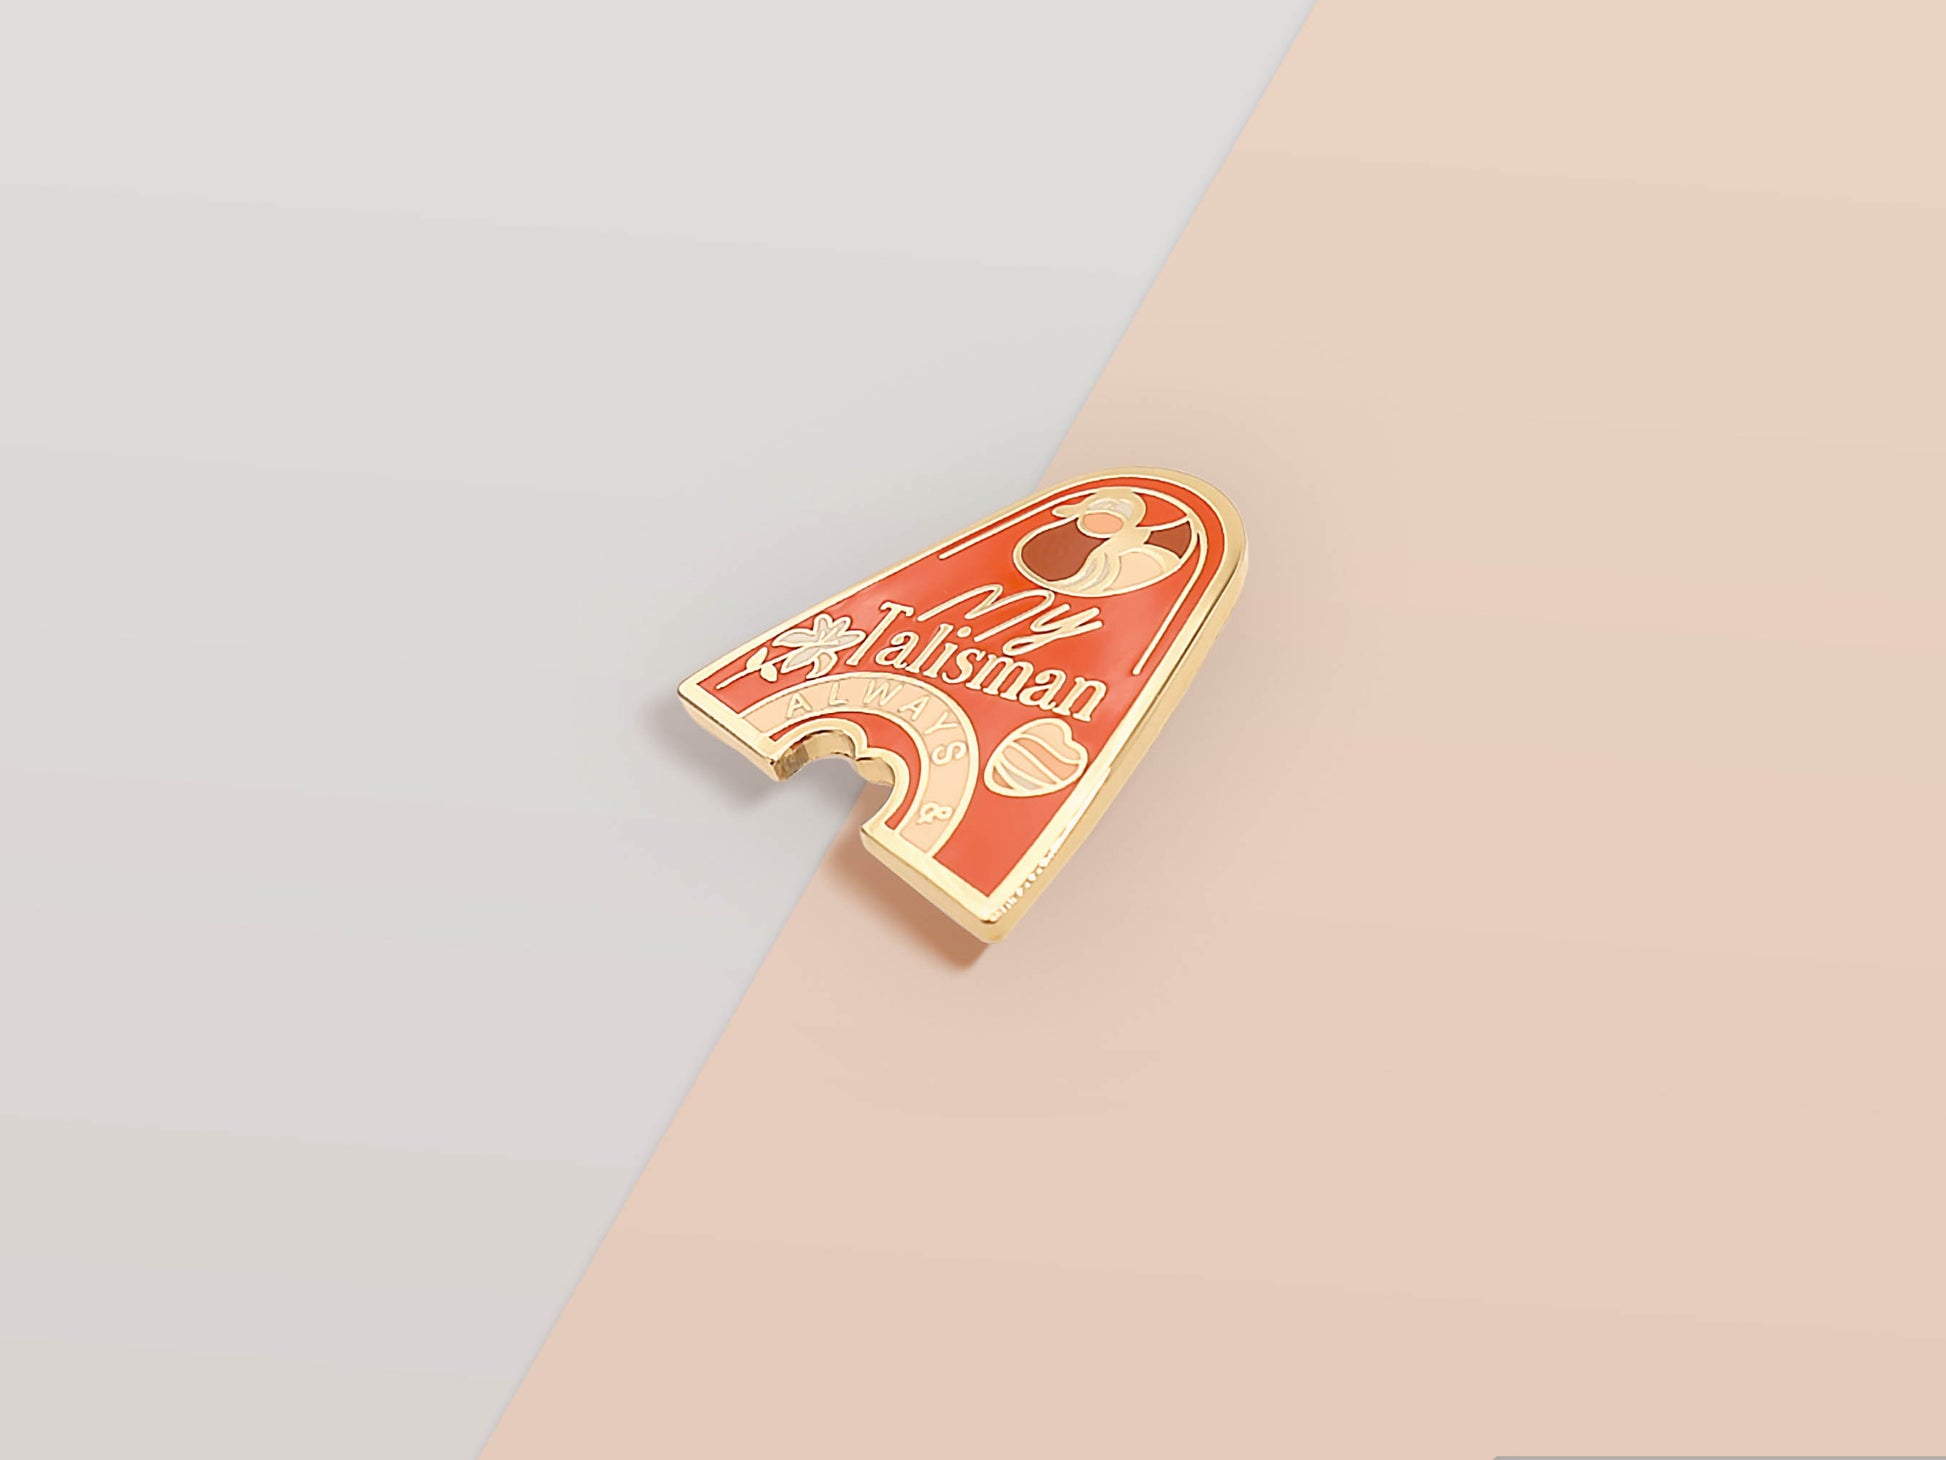 Top part of the Gold Enamel Talisman Pin with red design and the words Couple's Talisman, Always & Forever. The pins design includes a hearts, ducks, as well as flowers and crystals.